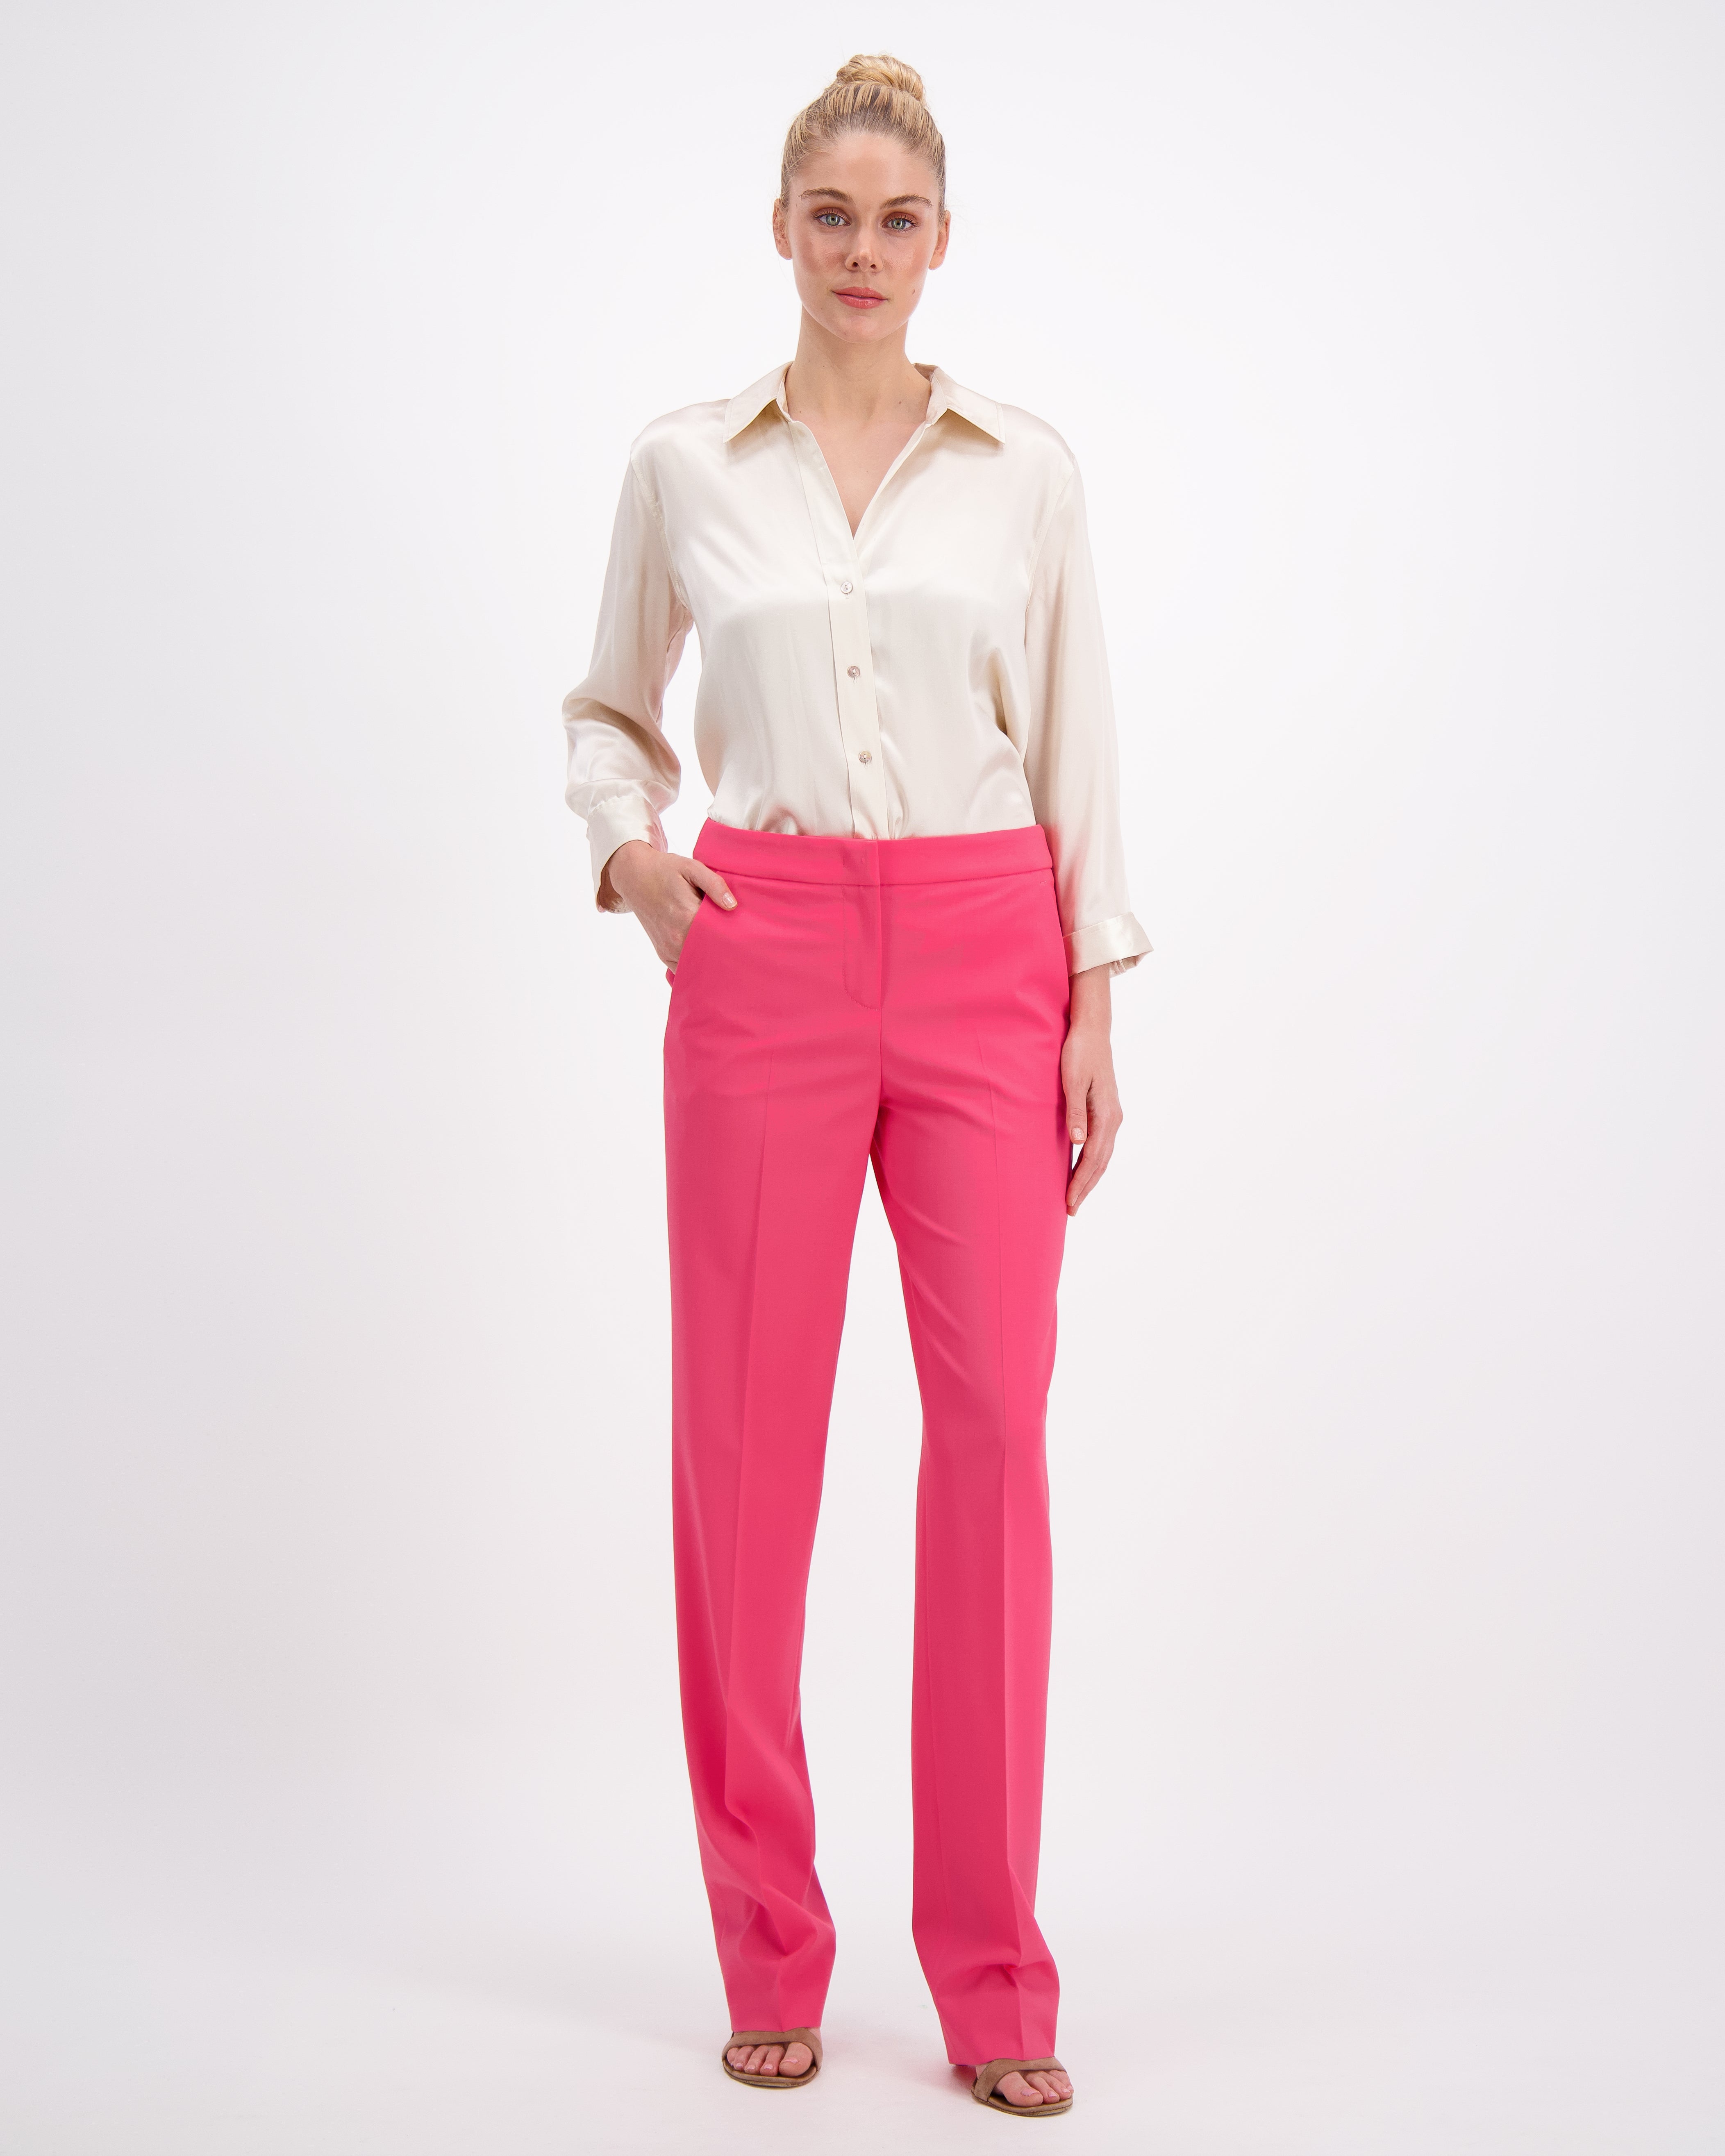 Womens Trousers in Hot Pink